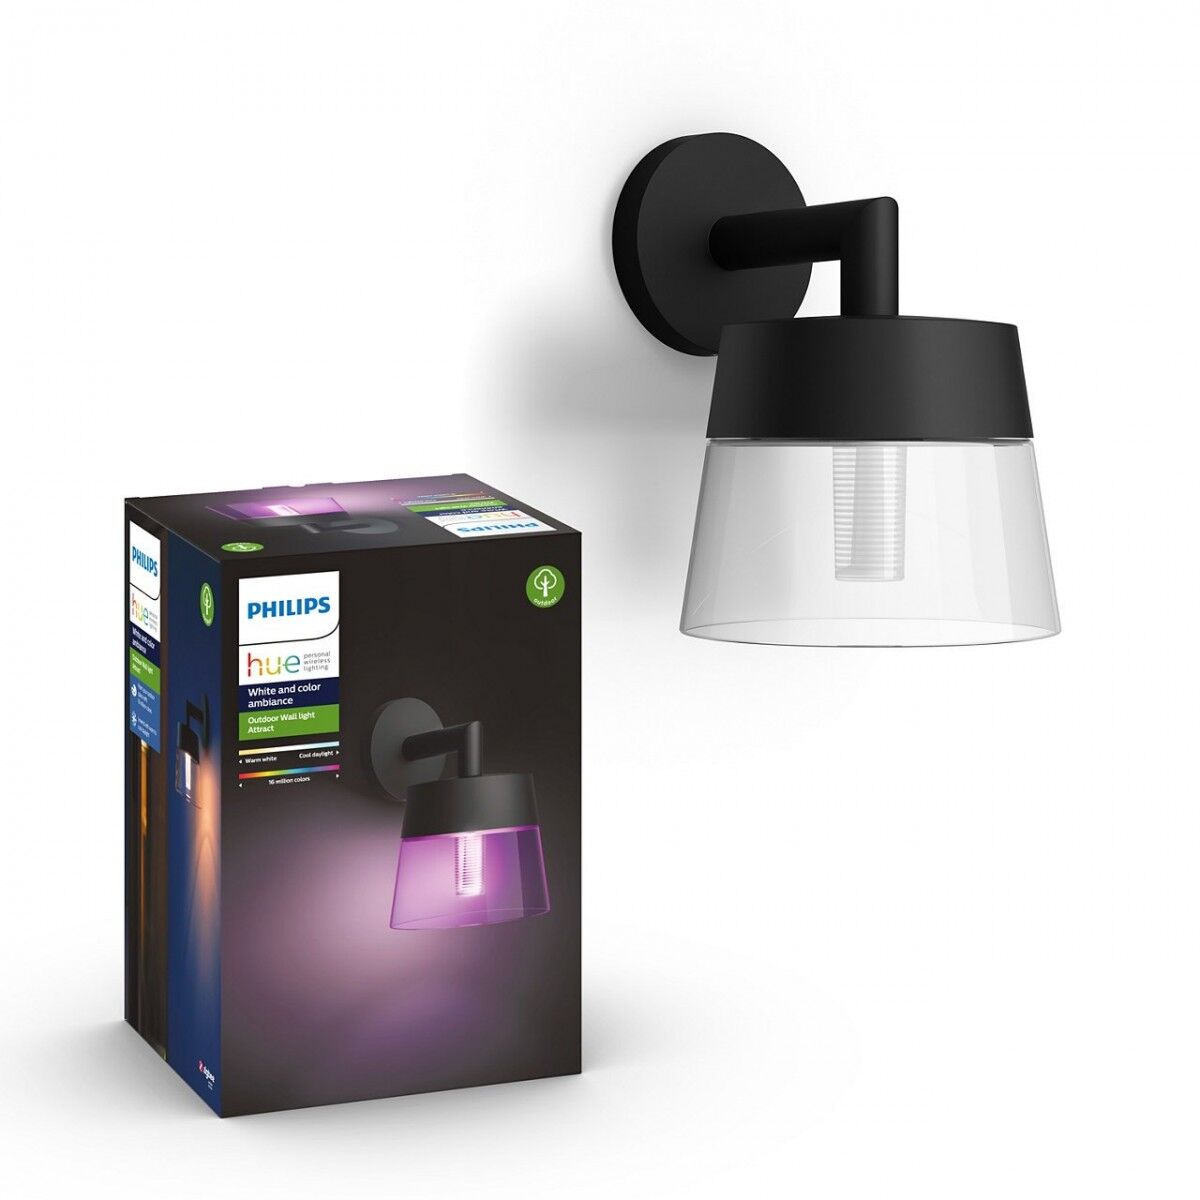 Philips Hue 17461/30 / P7 LED vonkajšie nástenné svietidlo Attract 1x8W   RGB - White and Color Ambiance